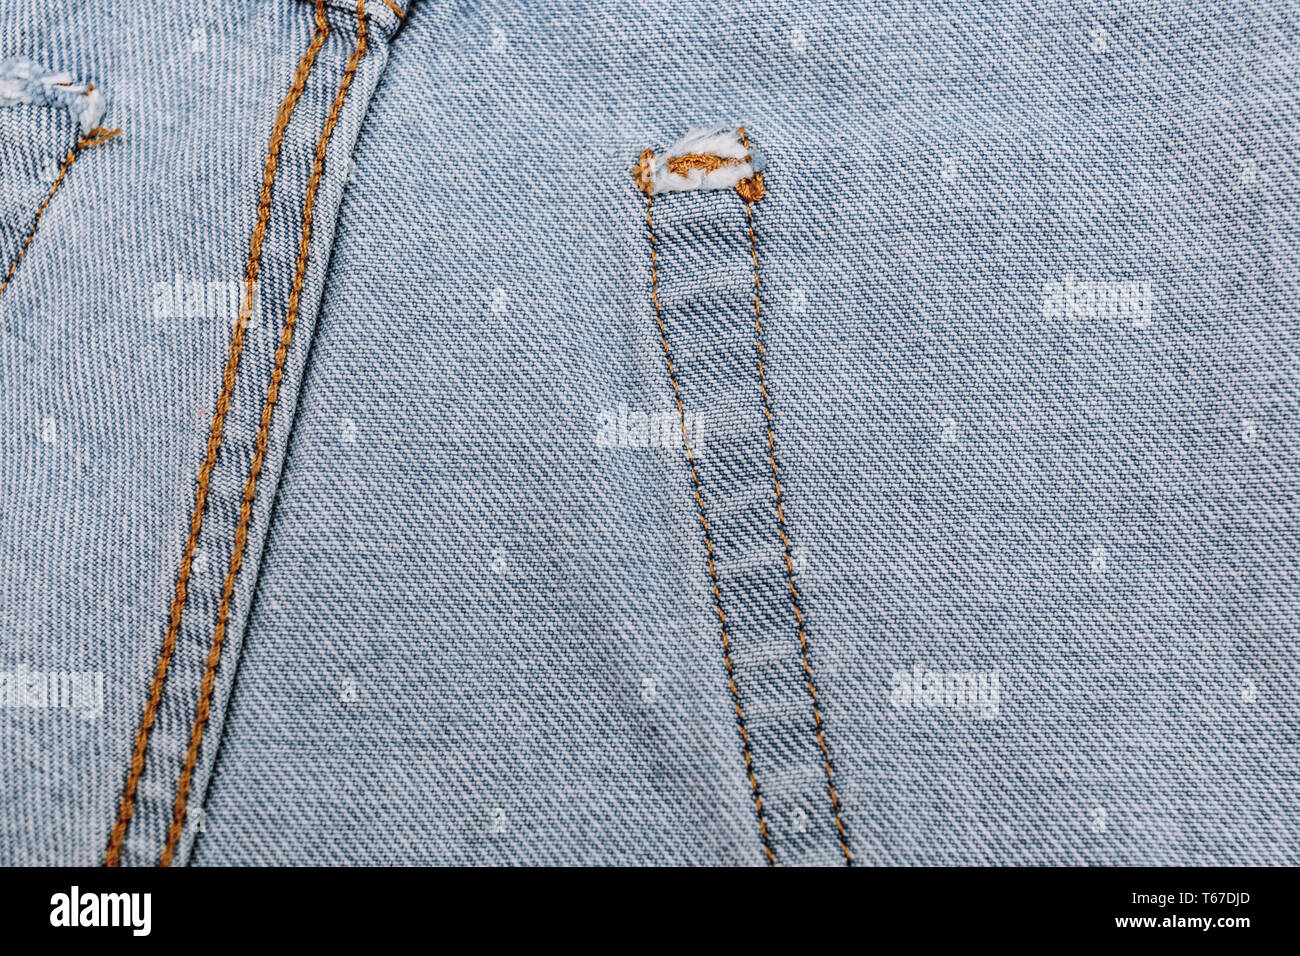 Jeans inside with seam closeup texture. jeans denim texture and background. Wrong side of black jeans fabric. Selectibe fokus, place for text. Stock Photo